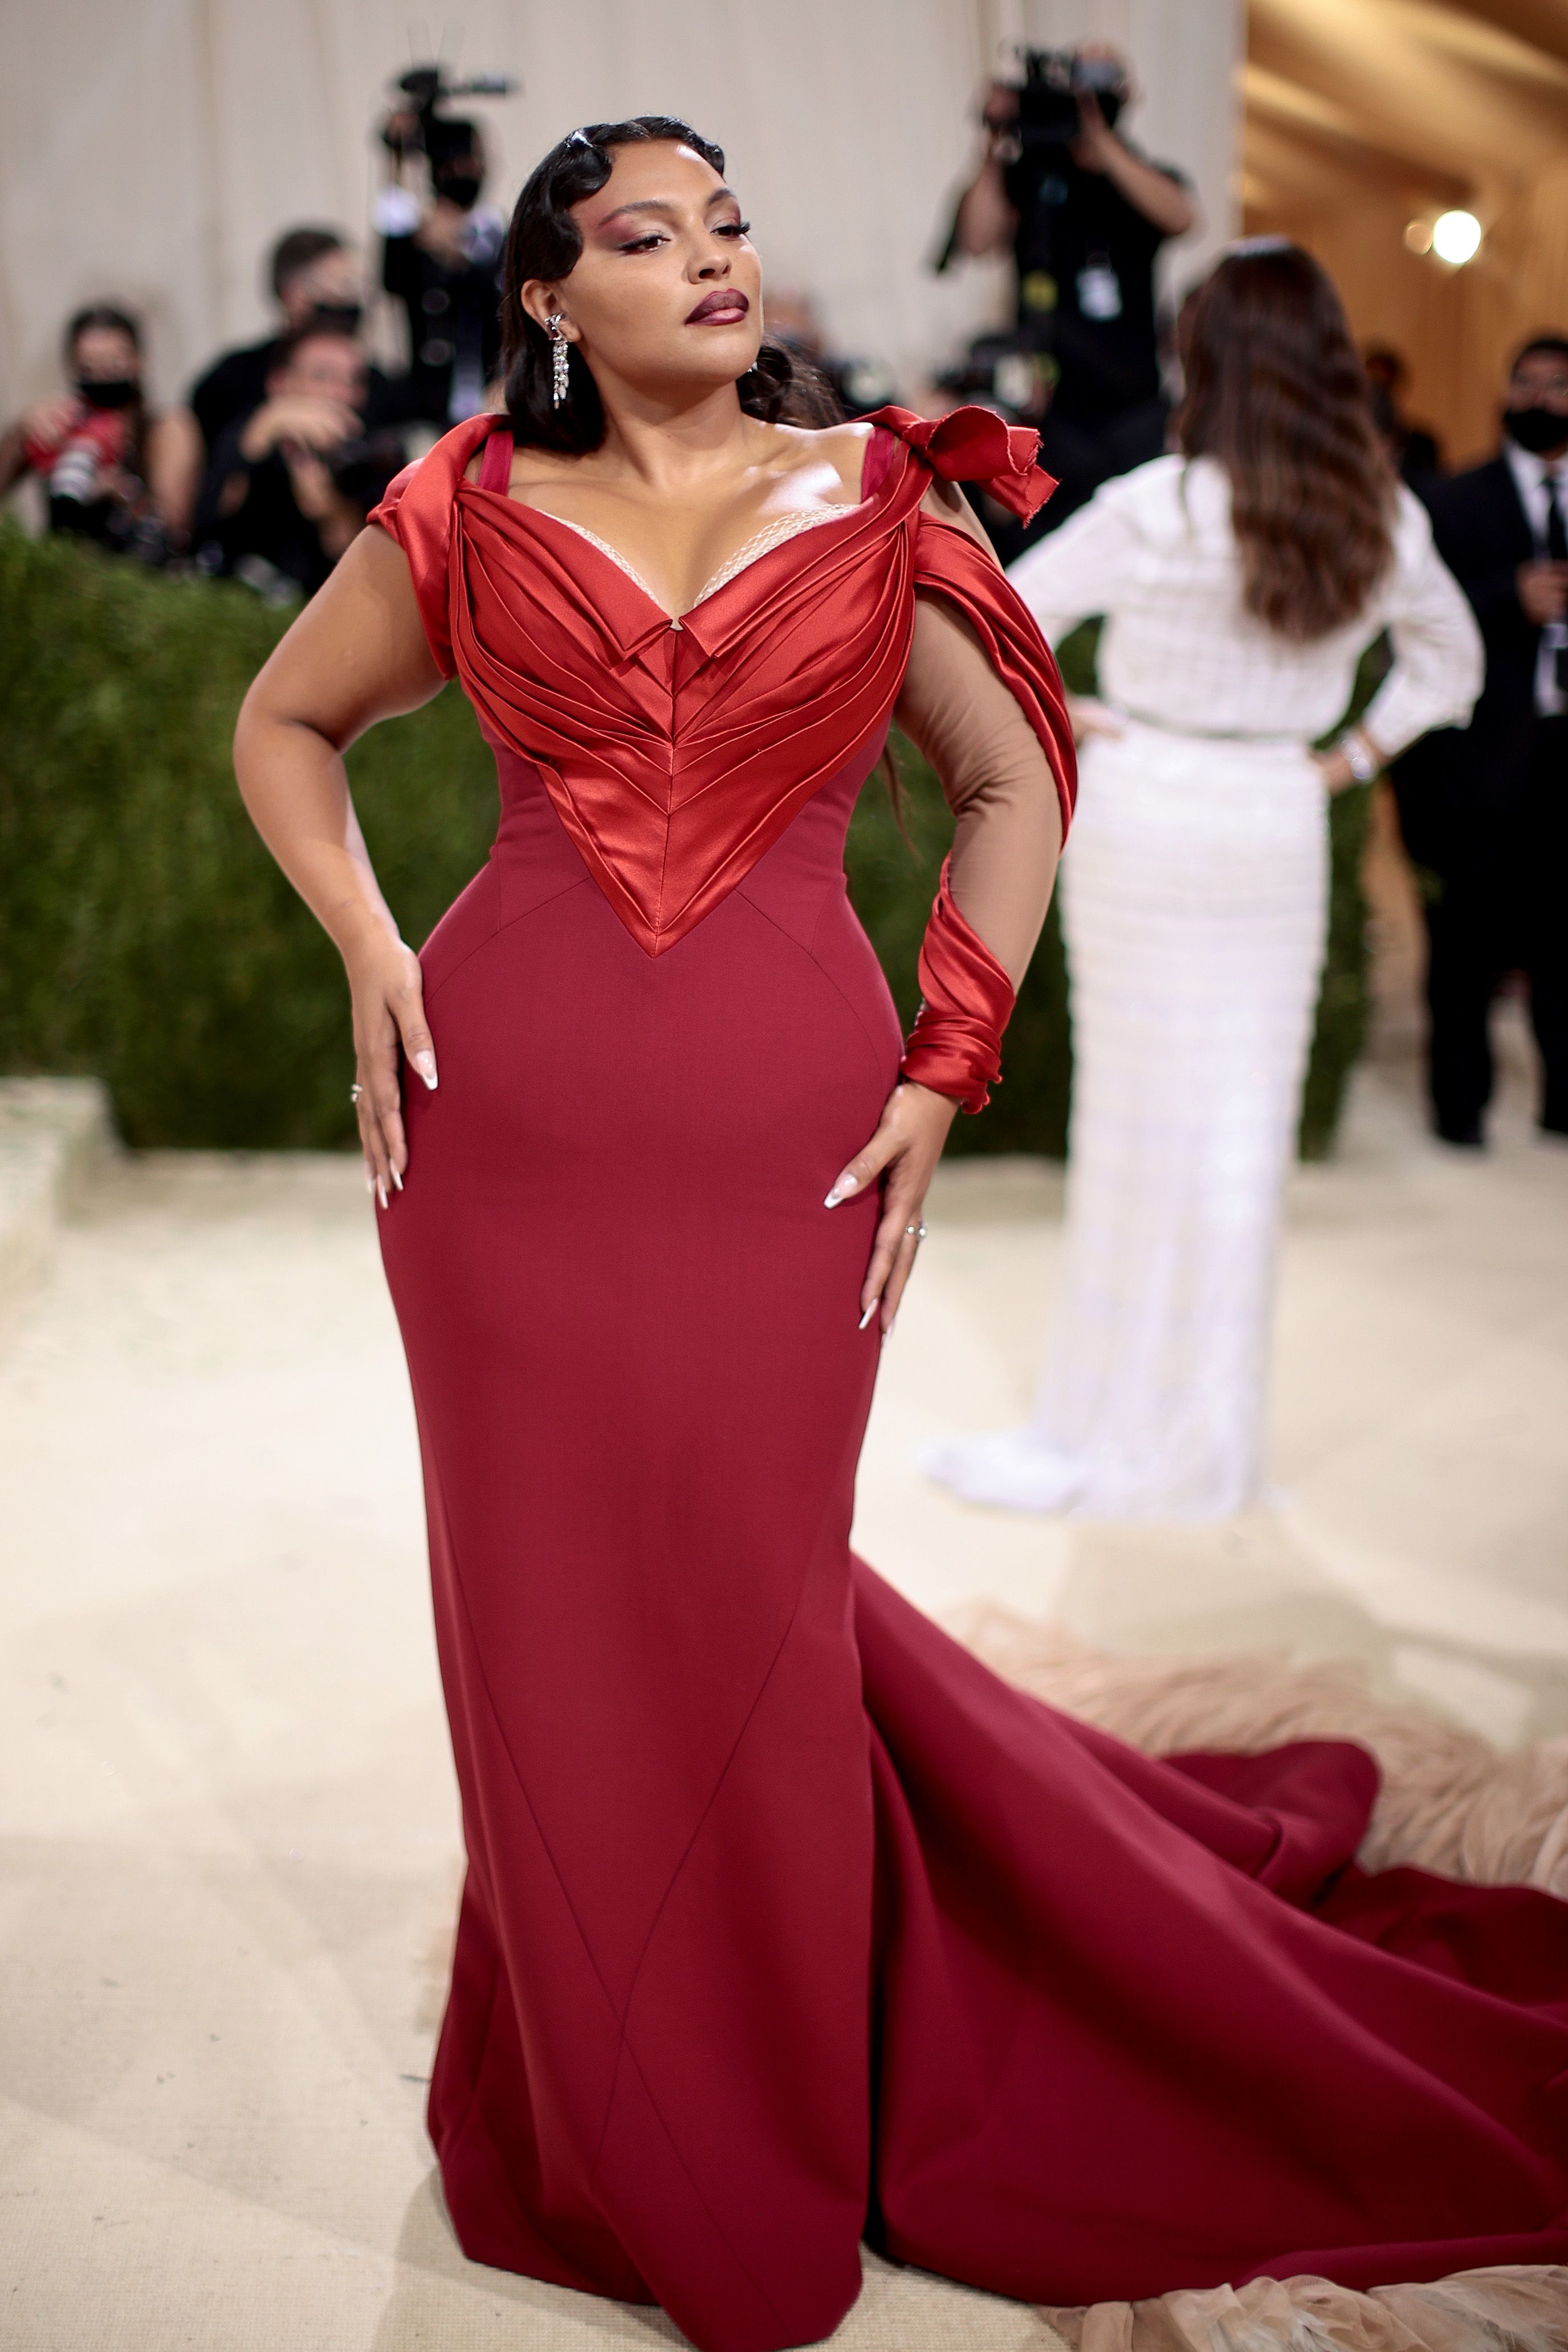 Met Gala Fashion 2021: See The Best of the Best Looks Here – StyleCaster